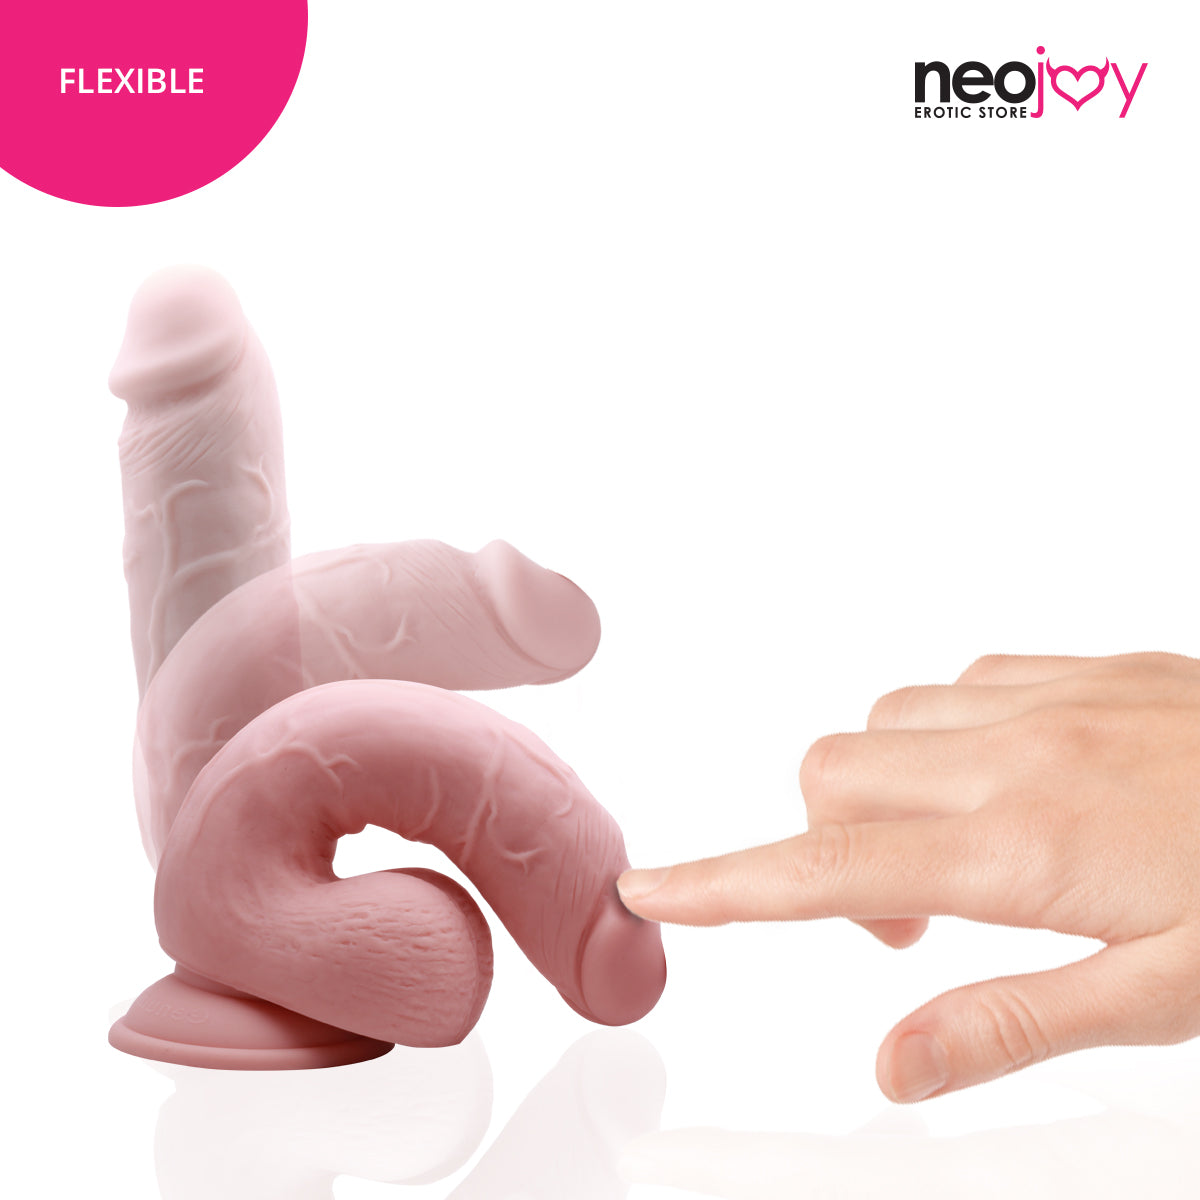 Neojoy - Chubby Dildo With Strap-On Dong Harness - 21.34cm - 8.4 inch